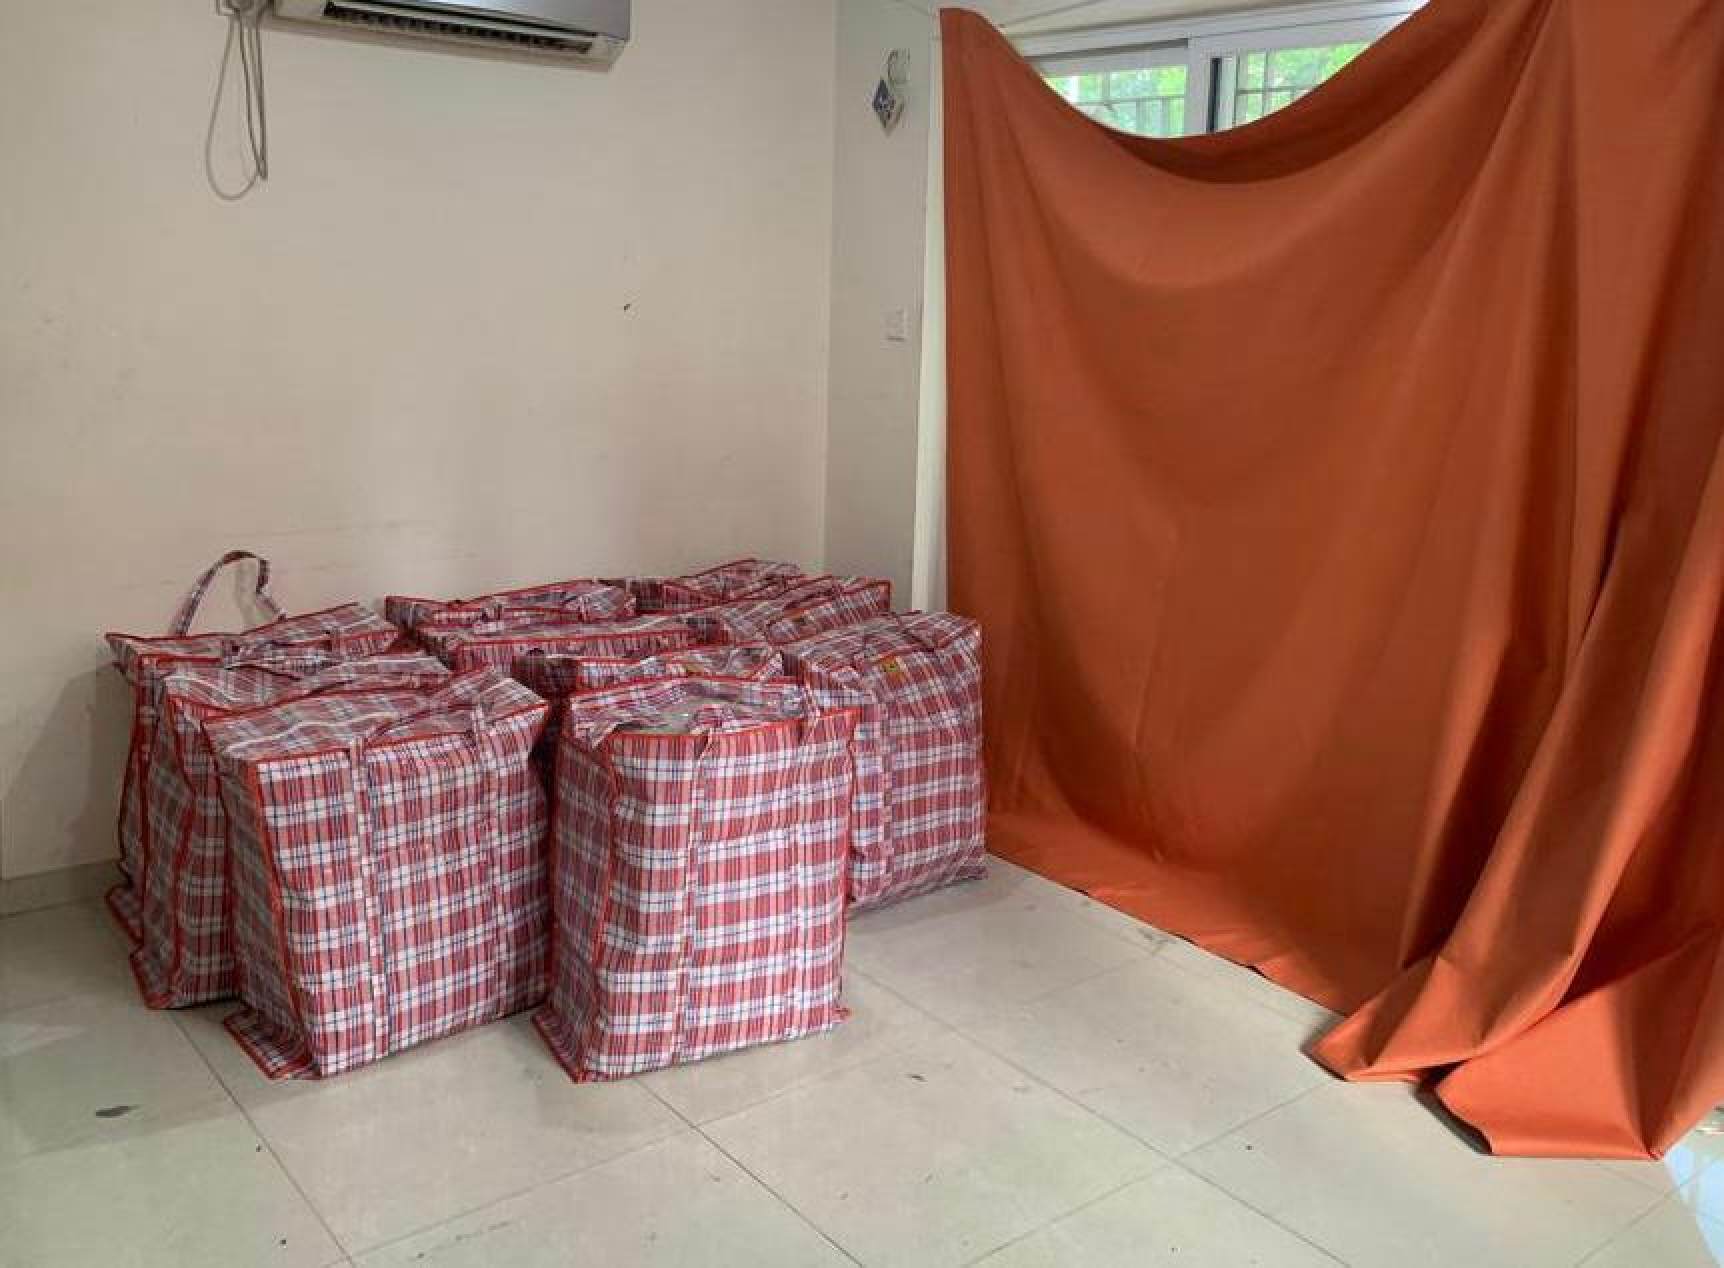 The nylon bags containing 159kg of cannabis buds that were seized from the ground-floor flat of a two-storey house at Kam Tsin Village in Sheung Shui on Thursday. Photo: Handout